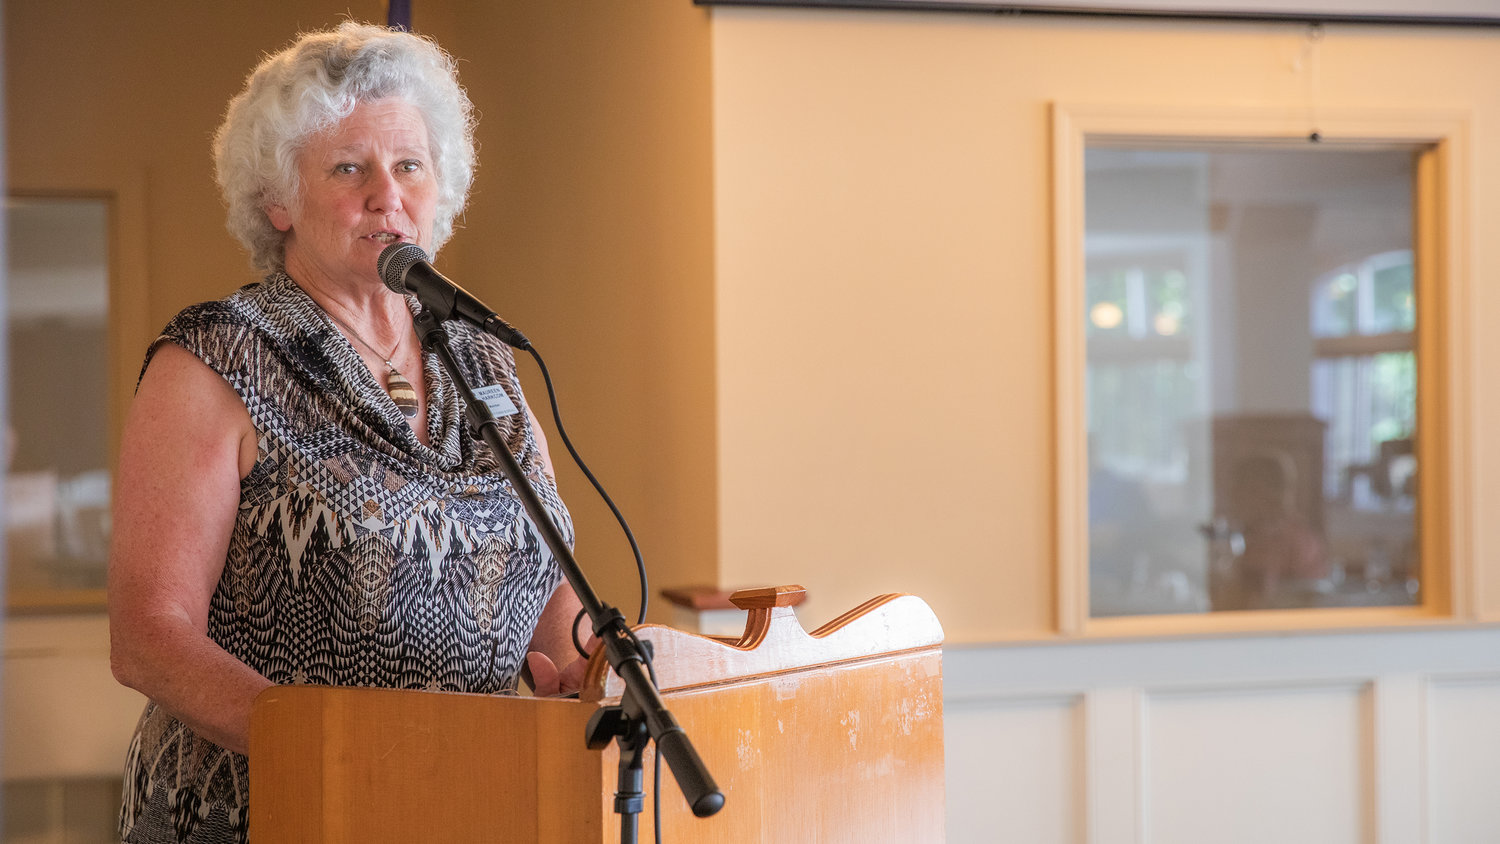 Maureen Harkcom, a board member on the Lewis County Farm Bureau, describes challenges farmers face with water rights during a chamber forum in Centralia on Thursday.